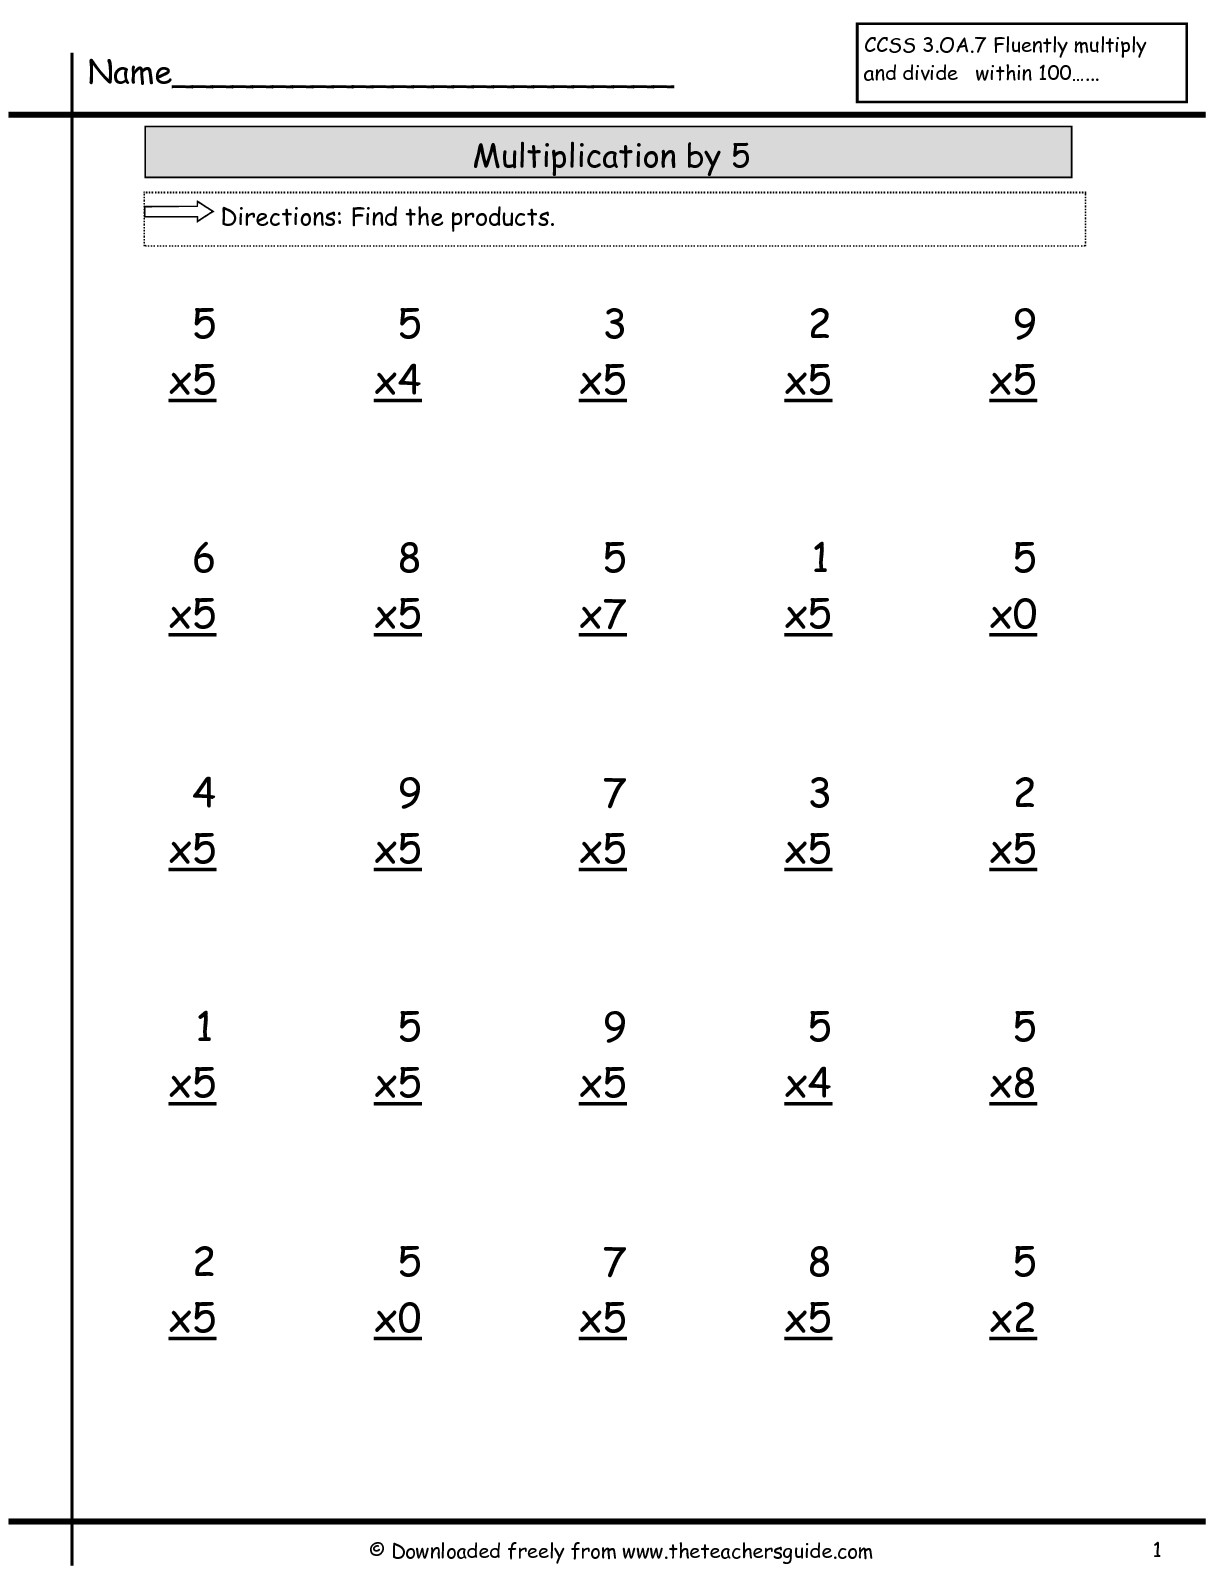 Multiplication Facts Worksheets From The Teacher&amp;#039;s Guide within Multiplication Worksheets Of 2